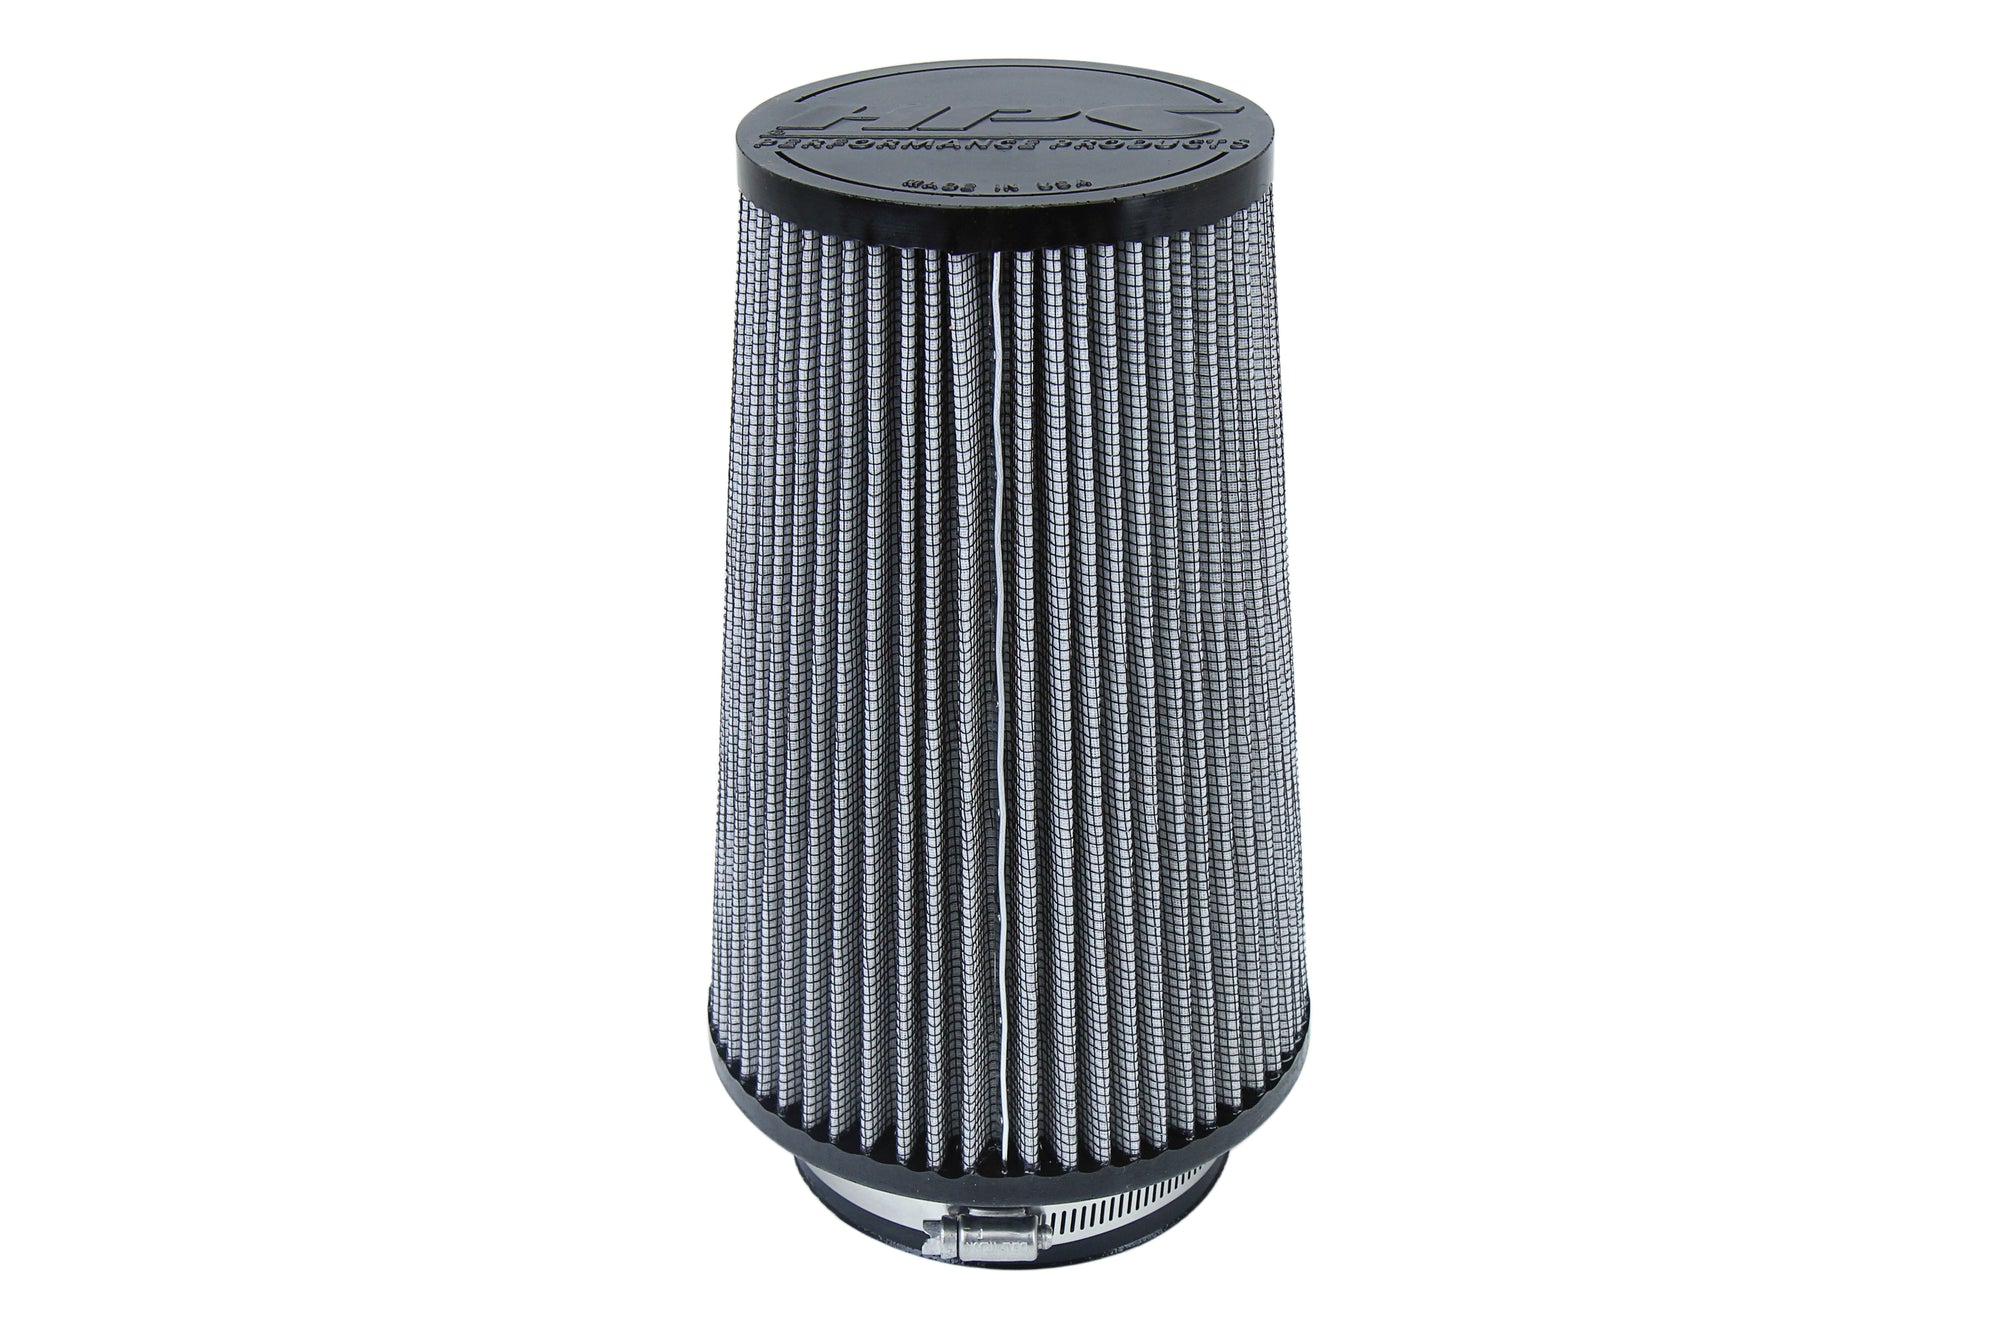 HPS Performance Air Filter 4 inch ID, 9 inch Length universal replacement intake kit shortram cold ram HPS-4301